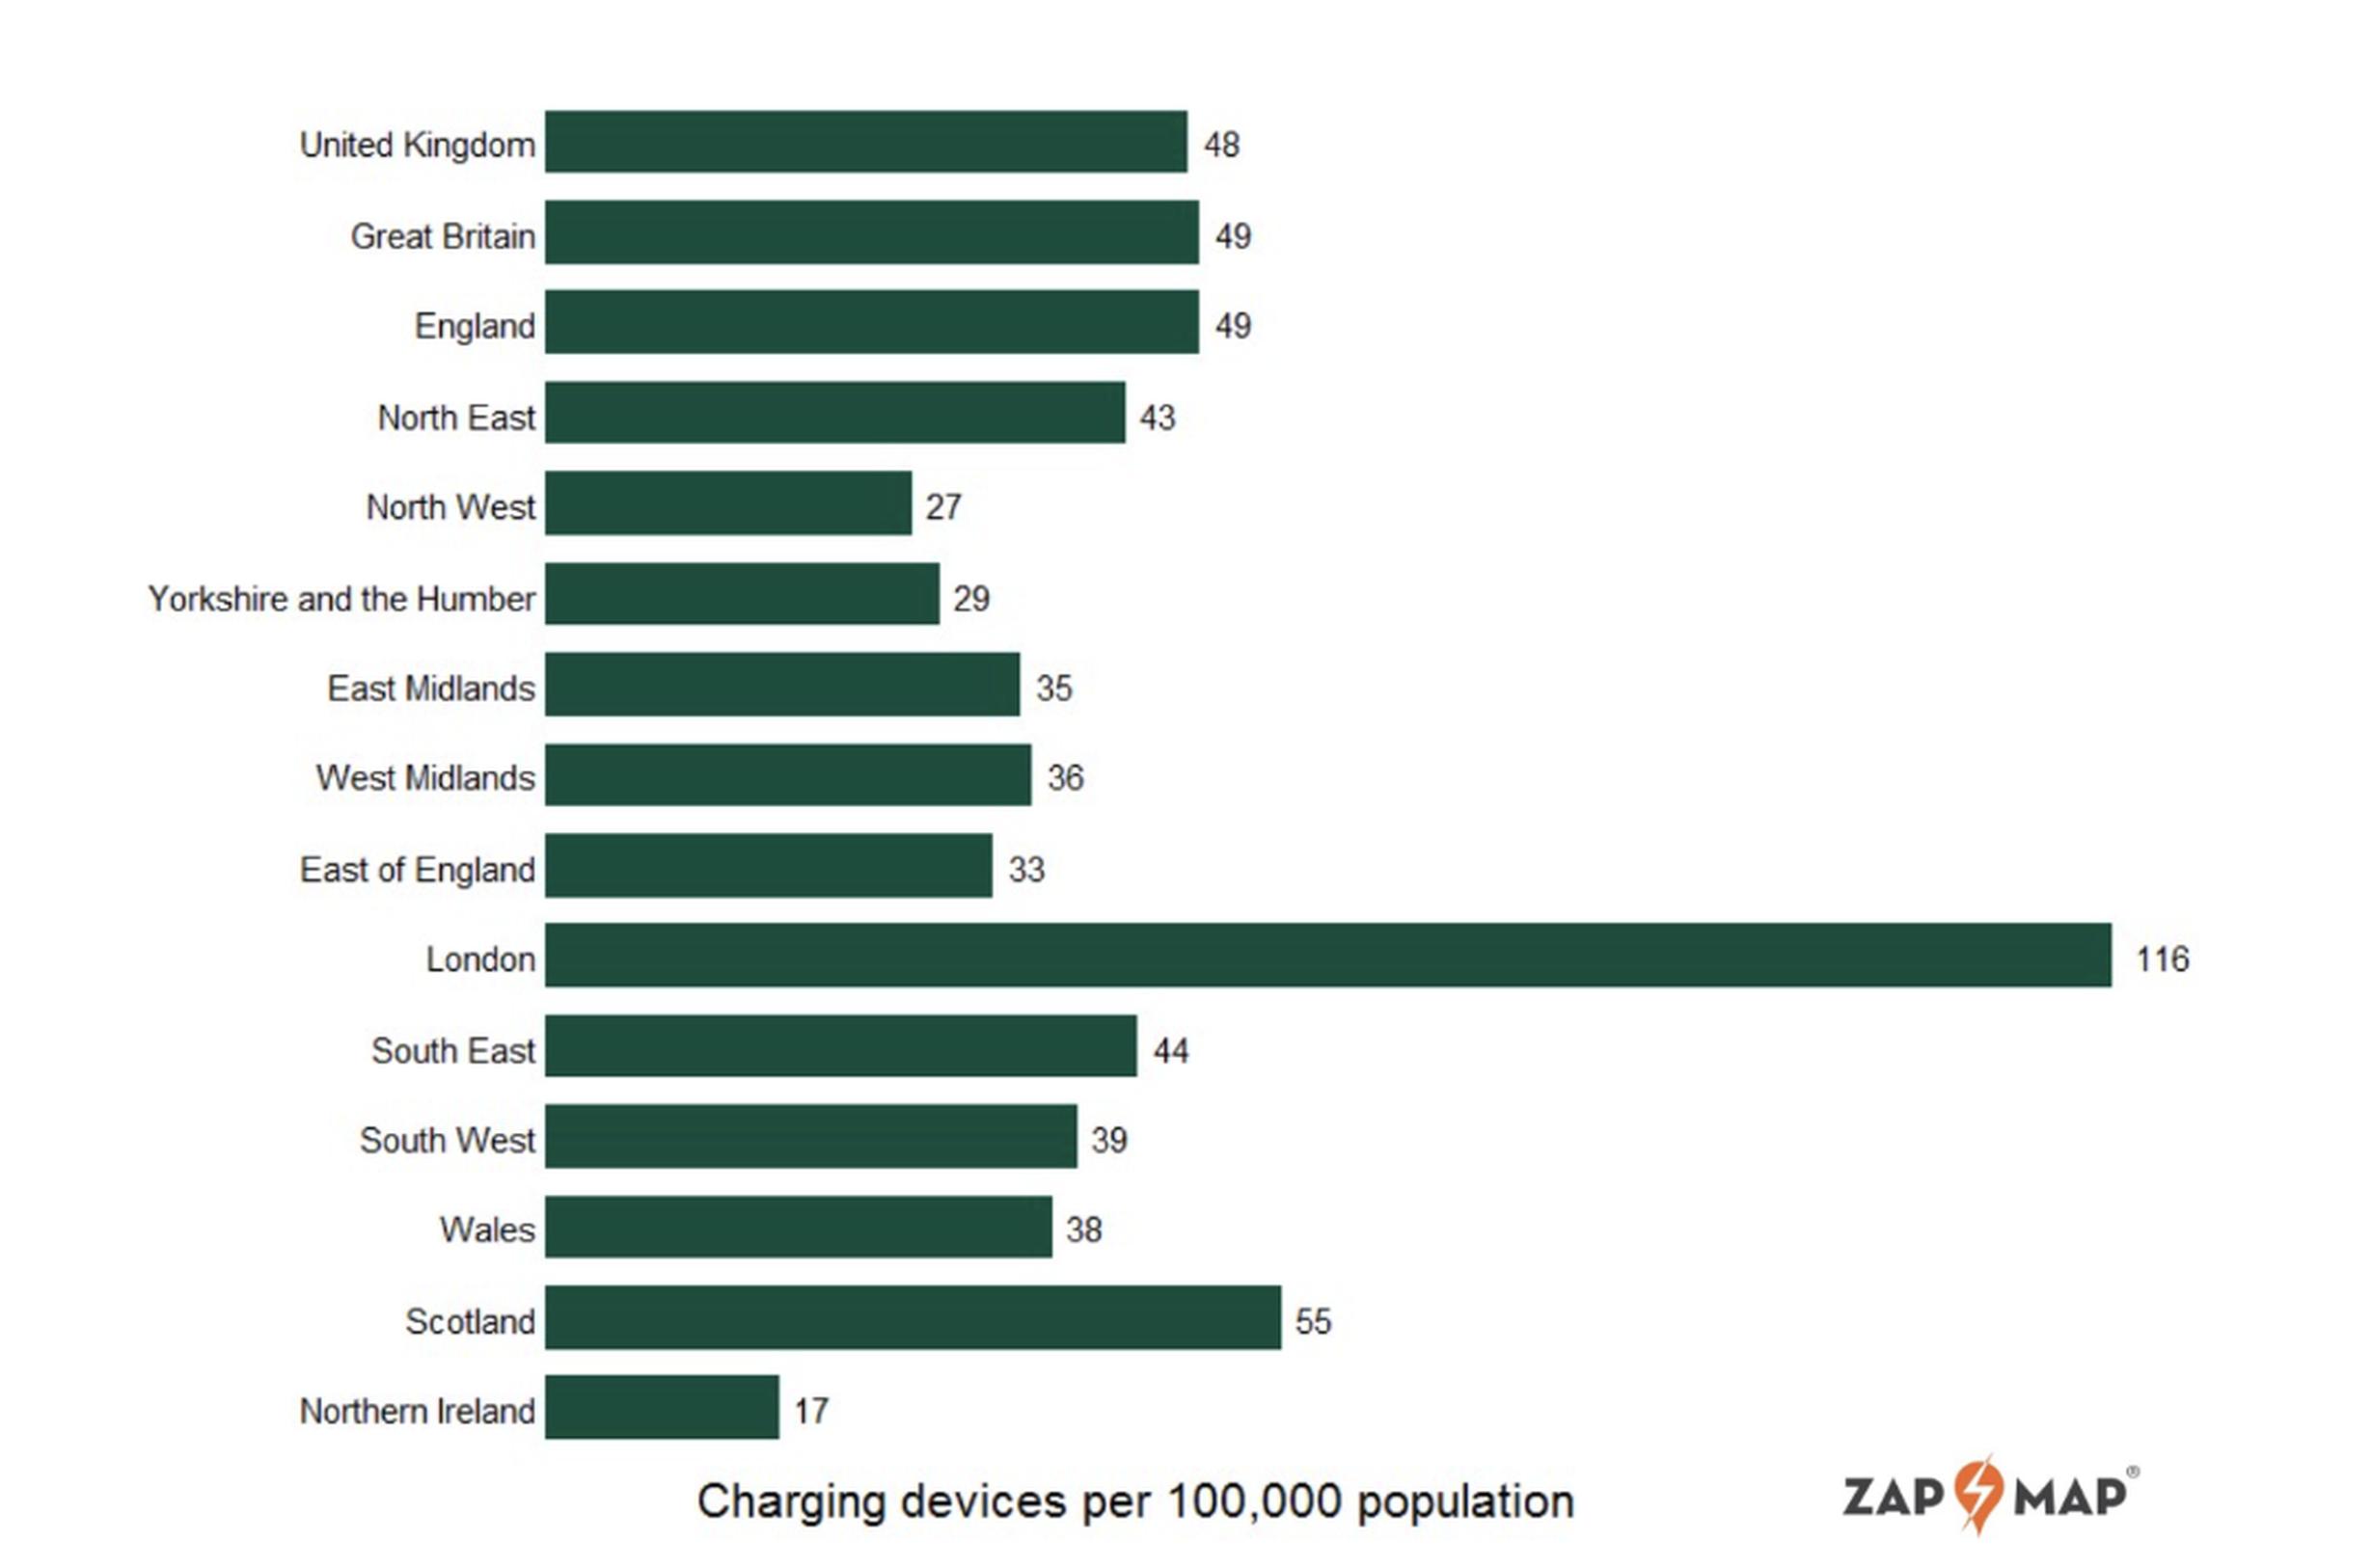 Public charging devices per 100,000 of population by UK country and region